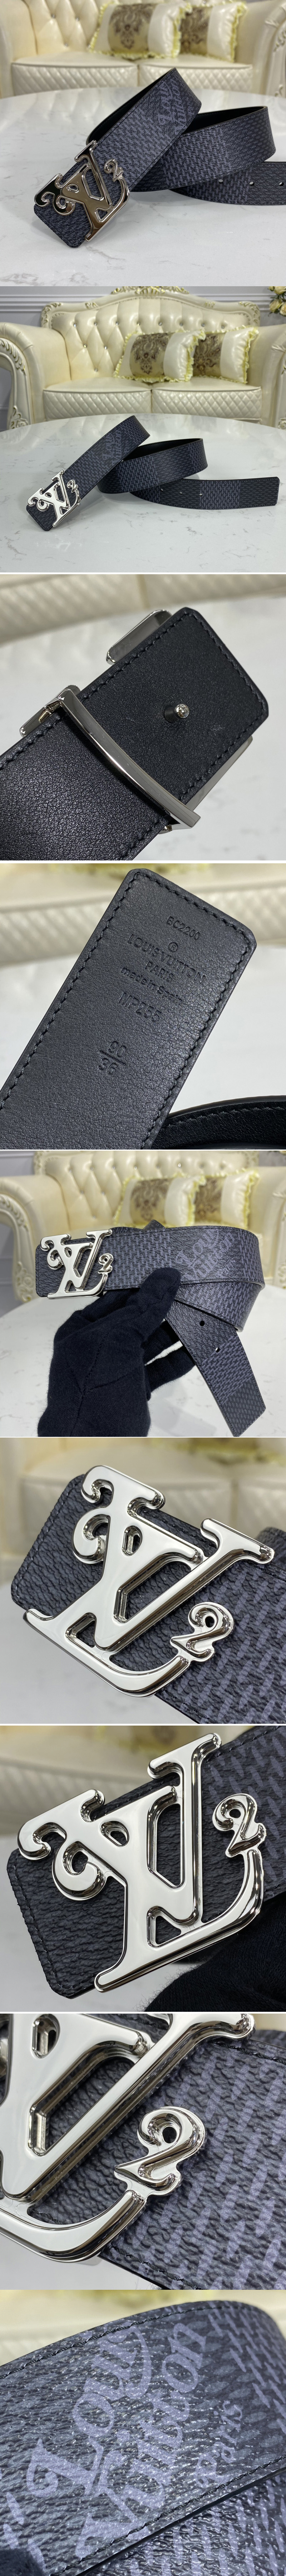 Replica Louis Vuitton MP255V LV Squared LV 40mm reversible belt in Damier Graphite Canvas/Black With White Buckle